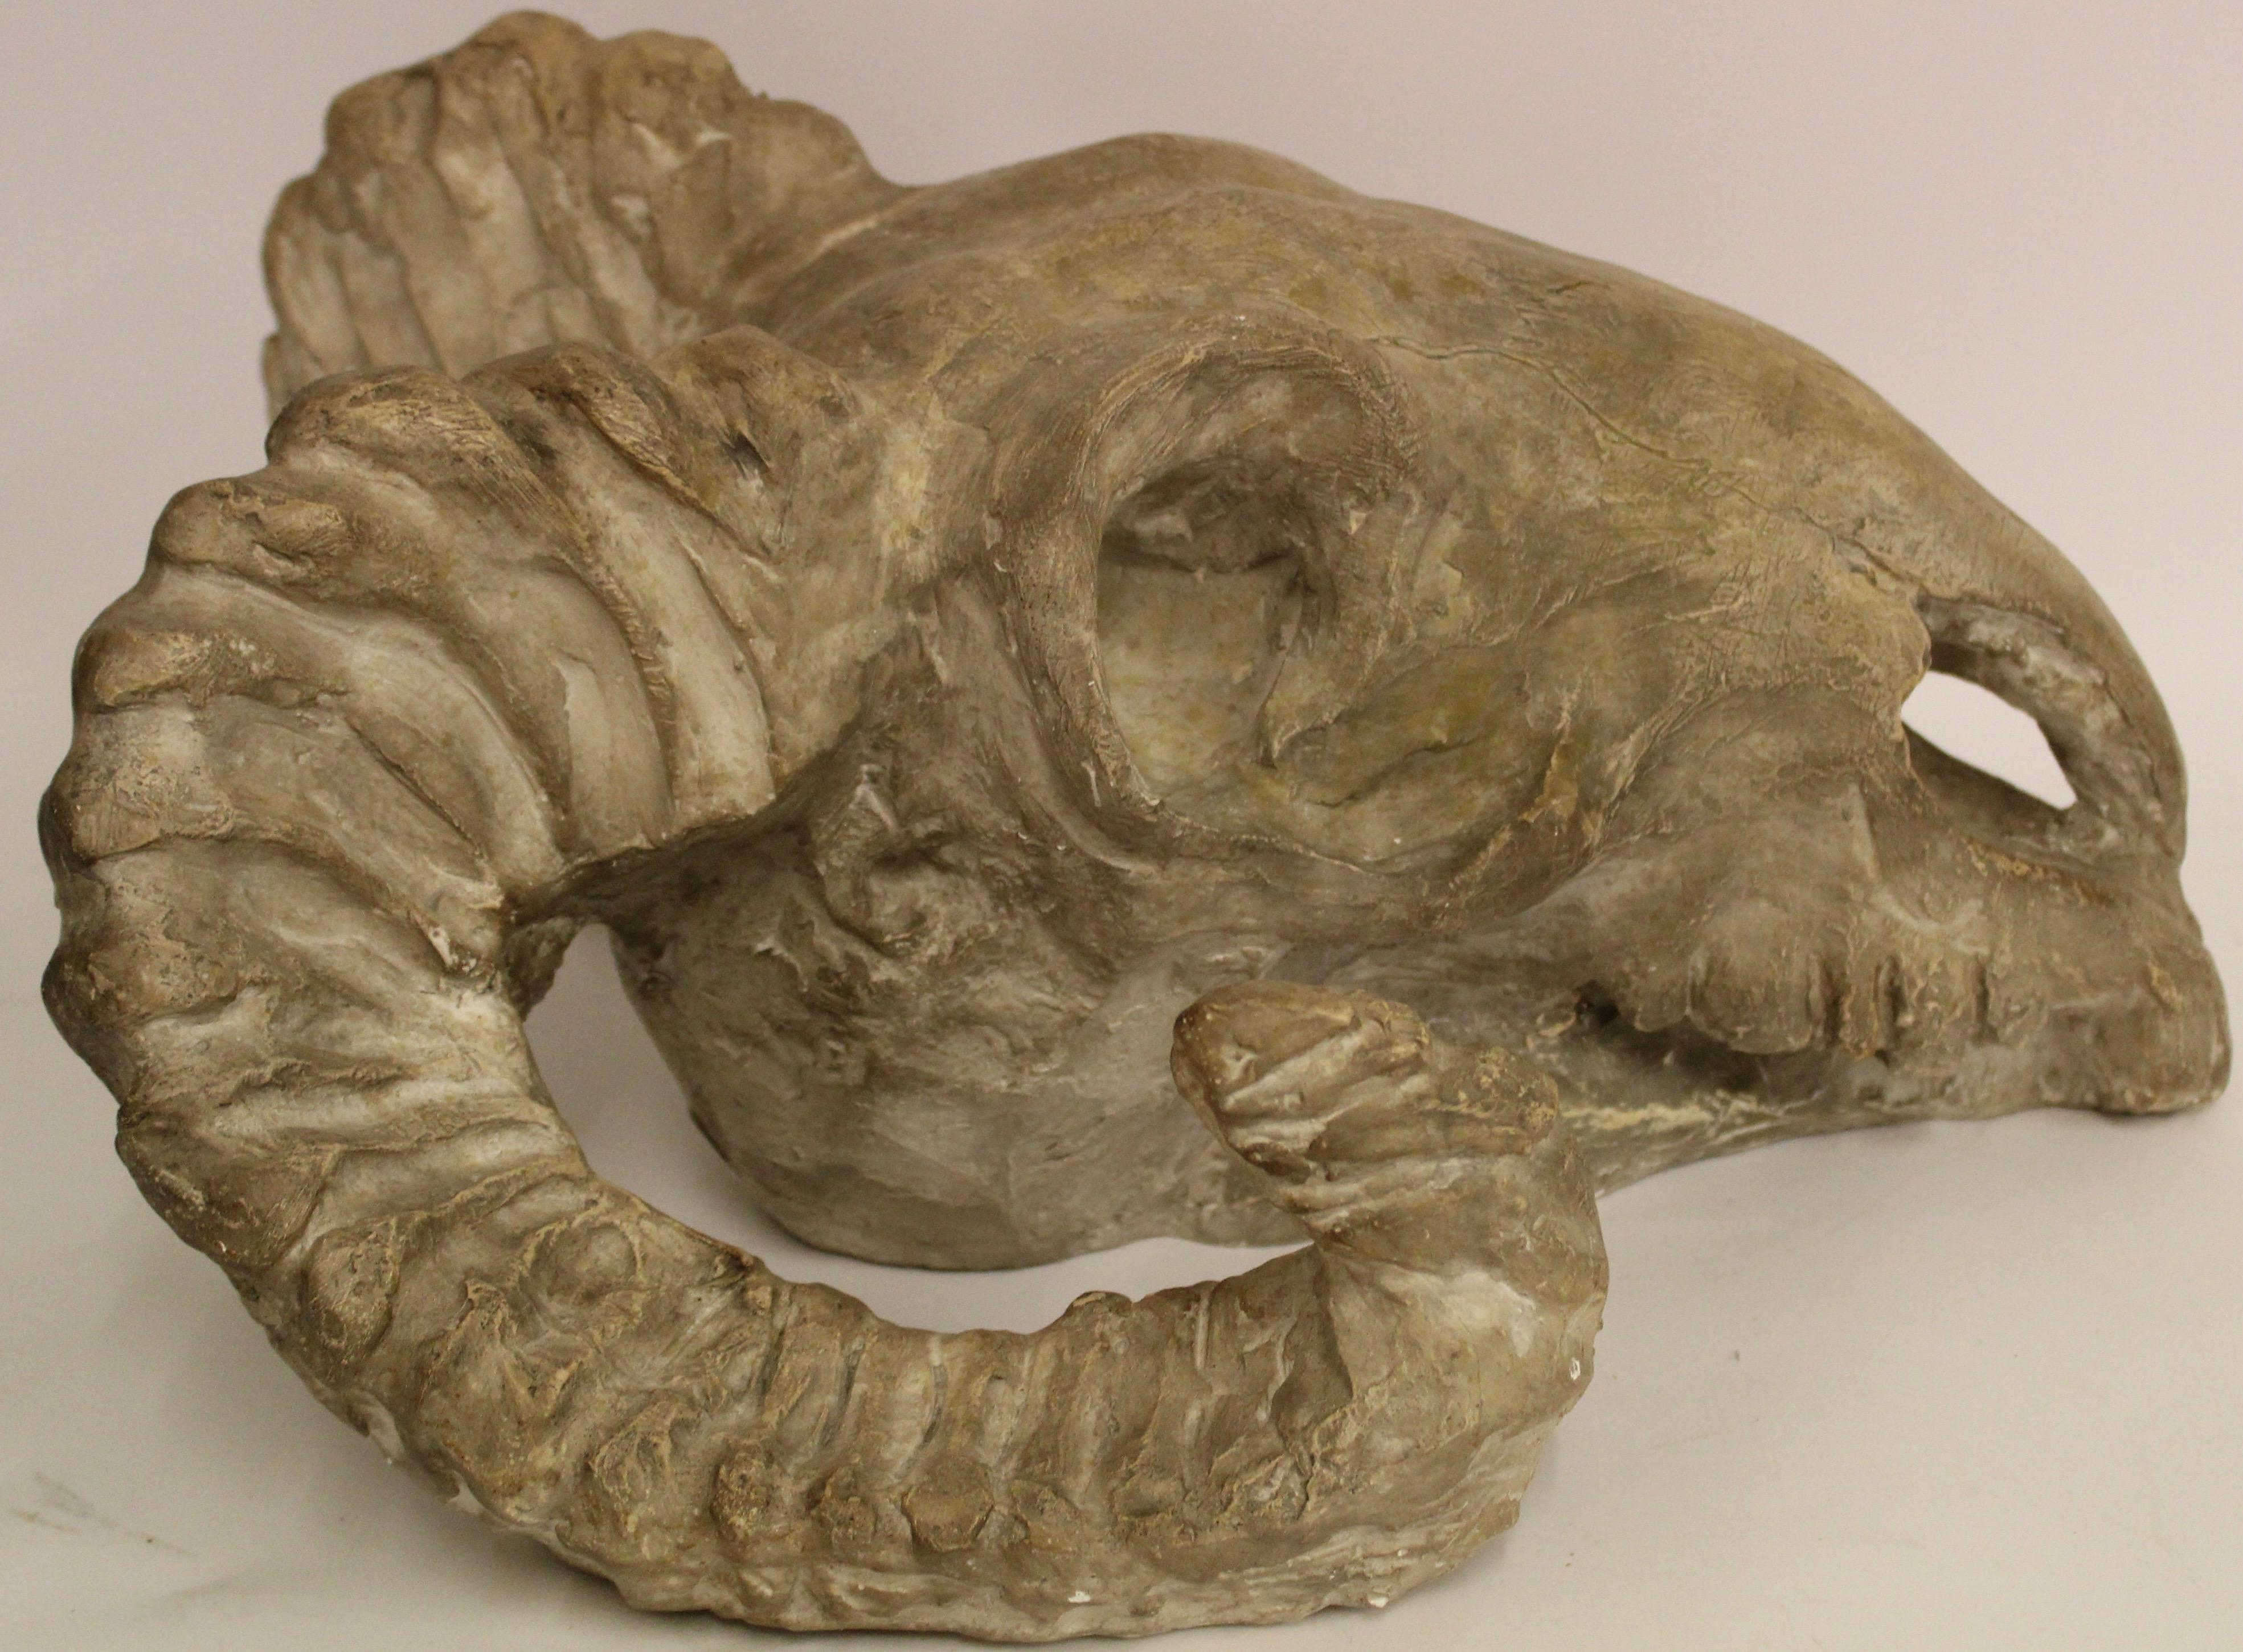 A 1930s Italian plaster ram's head skull. Complete with large curling ridged horns, the plaster with a darker, aged patina giving the skull a 'lifelike' quality. This would have been a studio piece, which meant that it was made as a maquette before